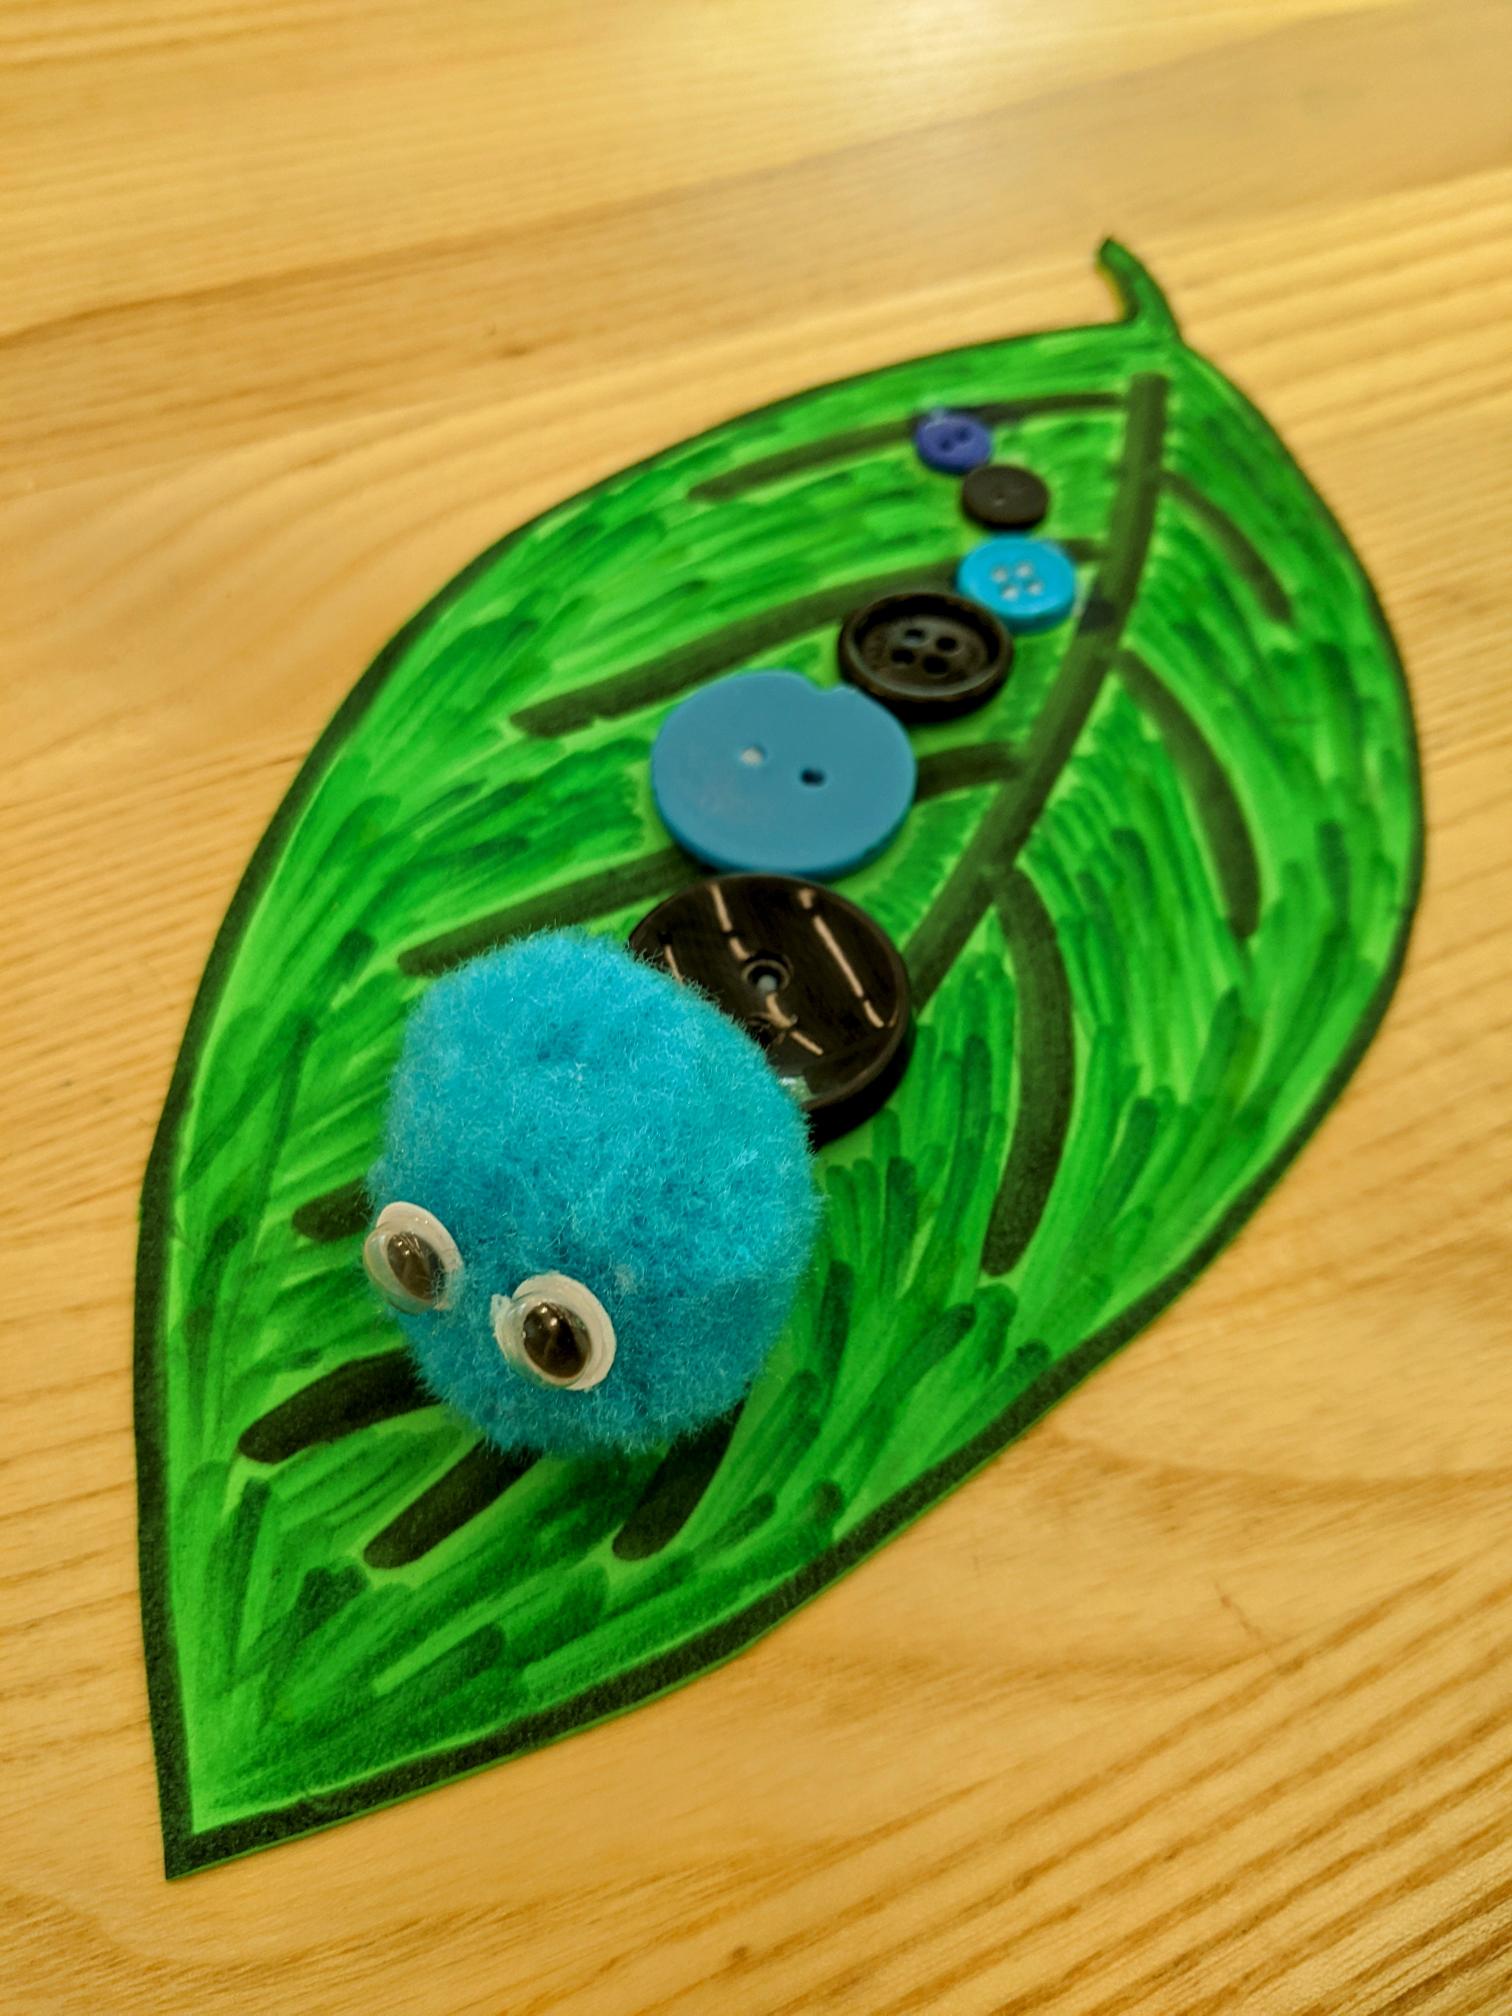 Caterpillar made from blue and black buttons in graduated sizes with a blue pompom head, sitting on a green foam leaf